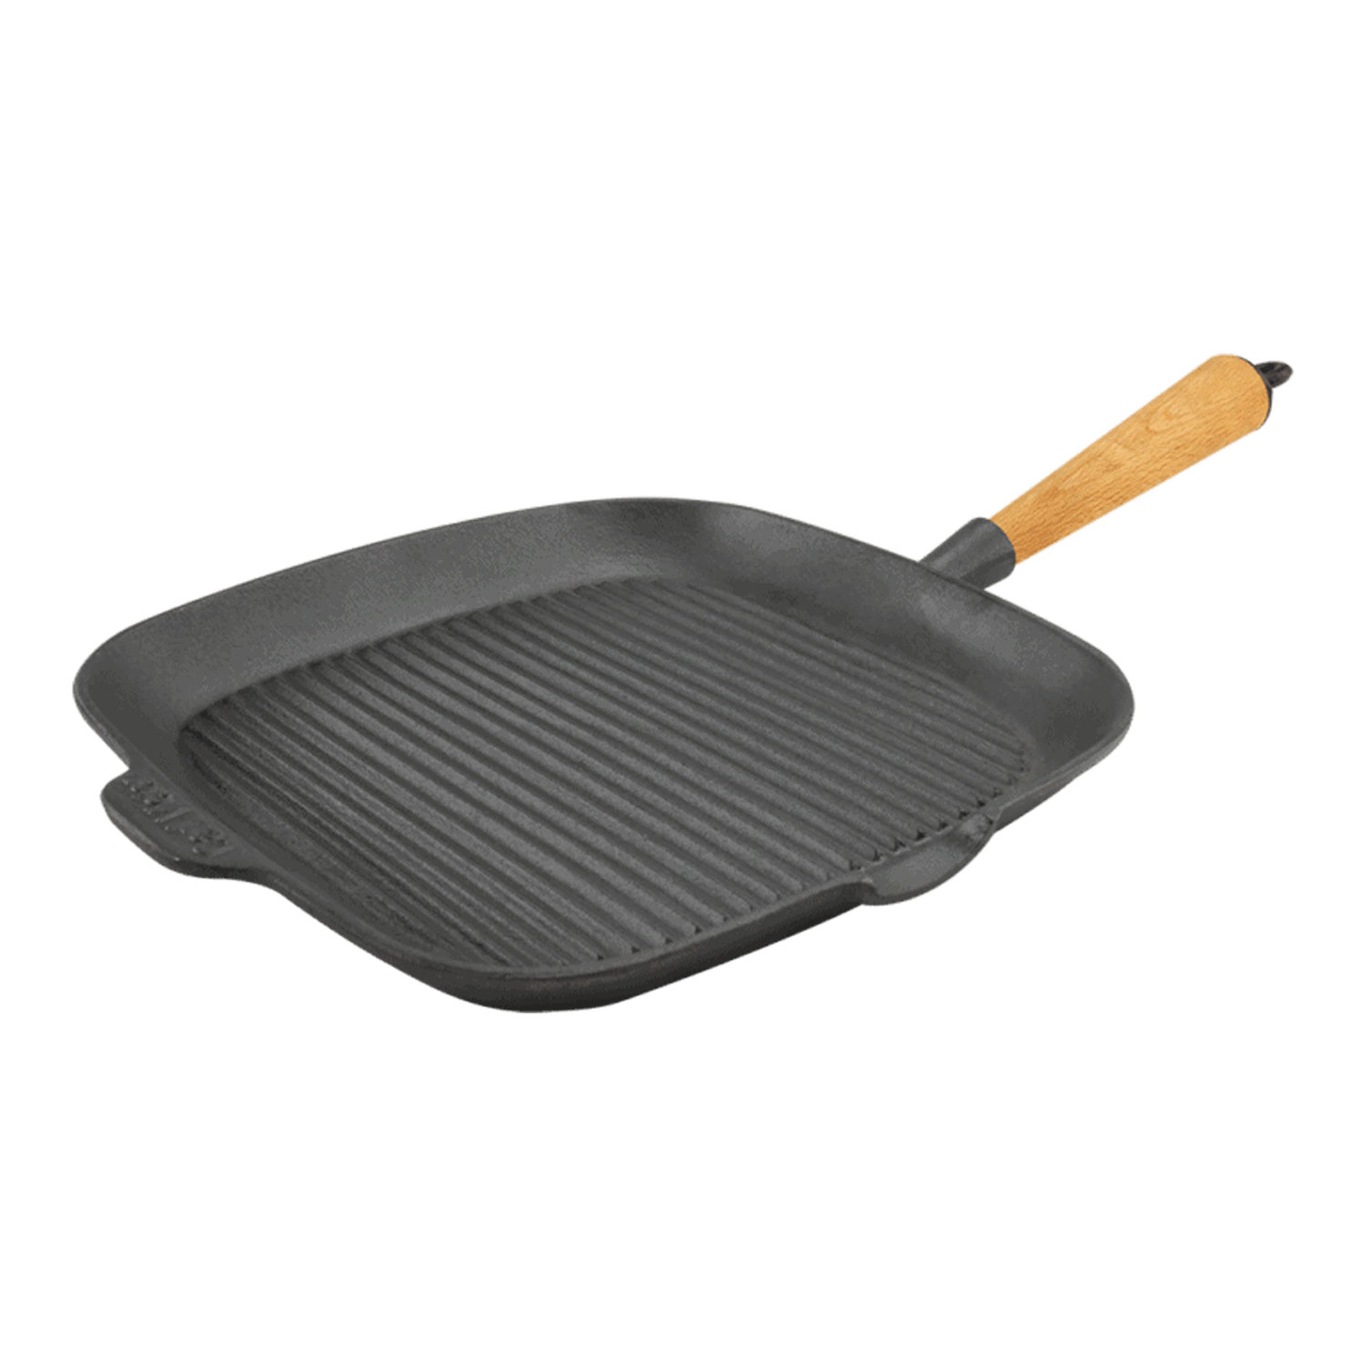 Squared Grill Pan 28 cm With Handle In Beech